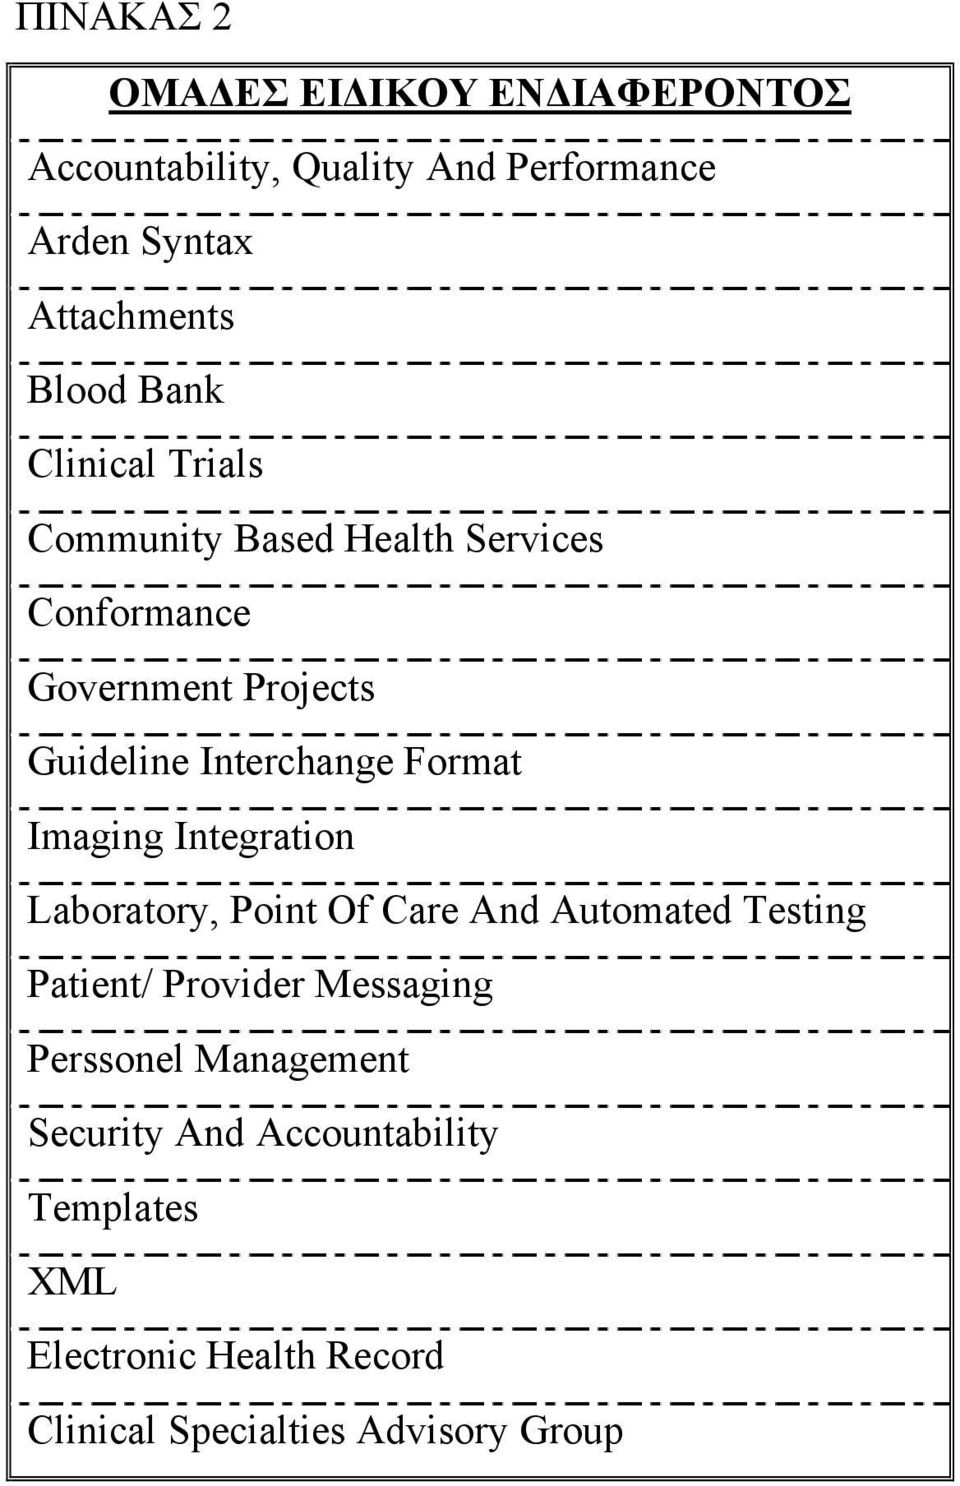 Format Imaging Integration Laboratory, Point Of Care And Automated Testing Patient/ Provider Messaging